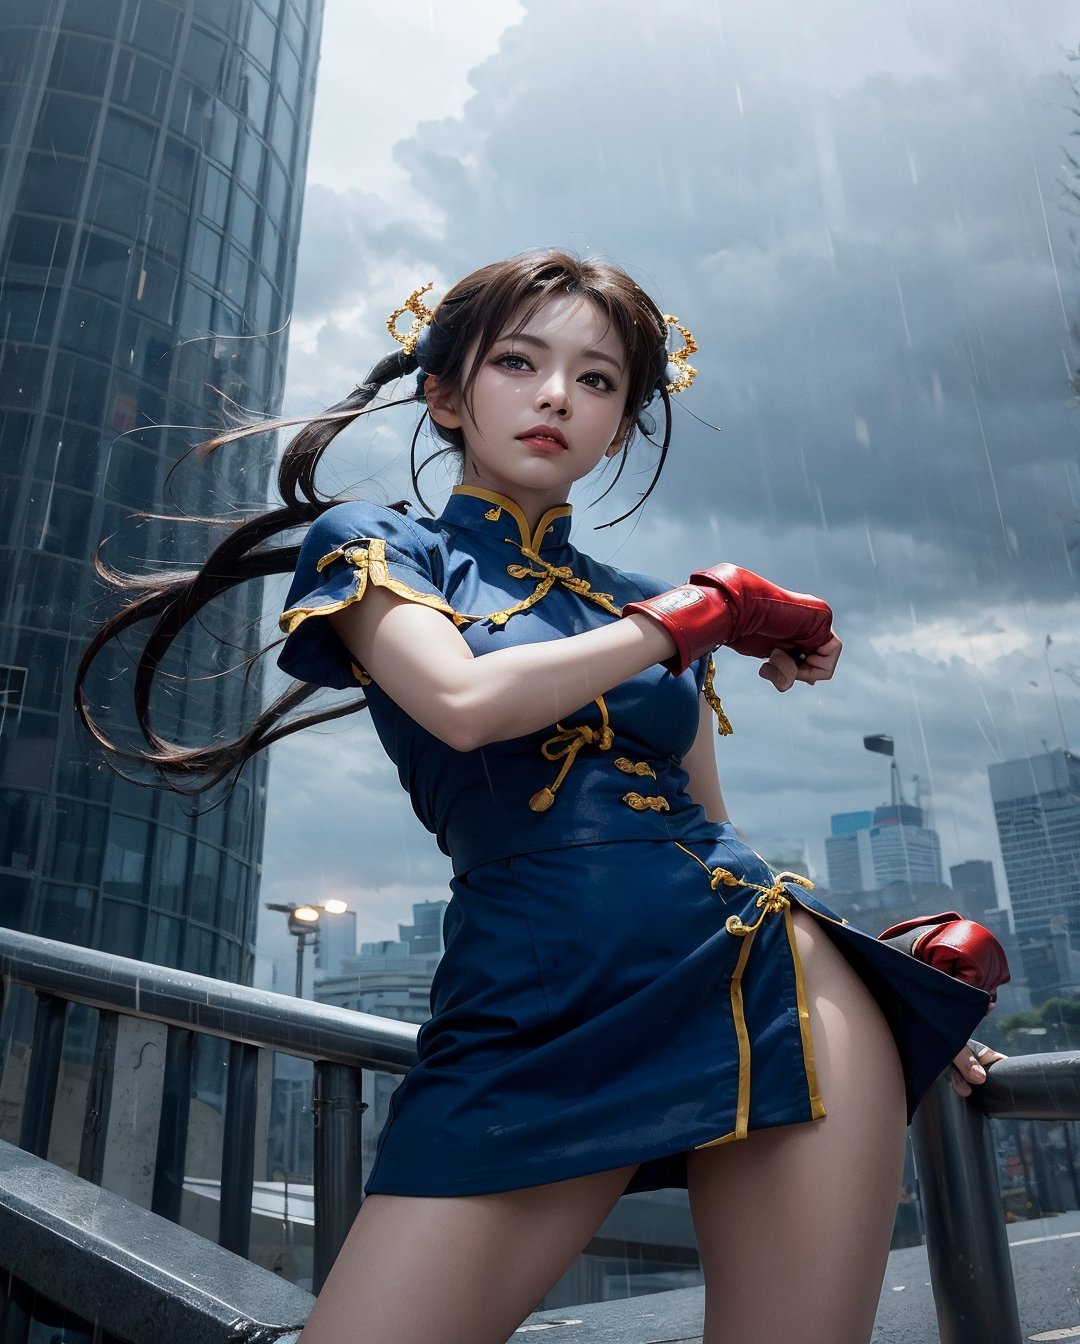 Ultra-detailed anime illustration portrays Chun-Li, one of the characters from Street Fighter, in a miniskirt, sexy pose, with a lot of citizens as setting in a dreamlike vision of Taipei 101, while a typhoon is coming, with dark clouds and drizzling rain.

Ensure all anatomical elements and actions are realistic, with no extraneous limbs or movements. Make sure both of her hands or fists are complete, and eyes are natural.